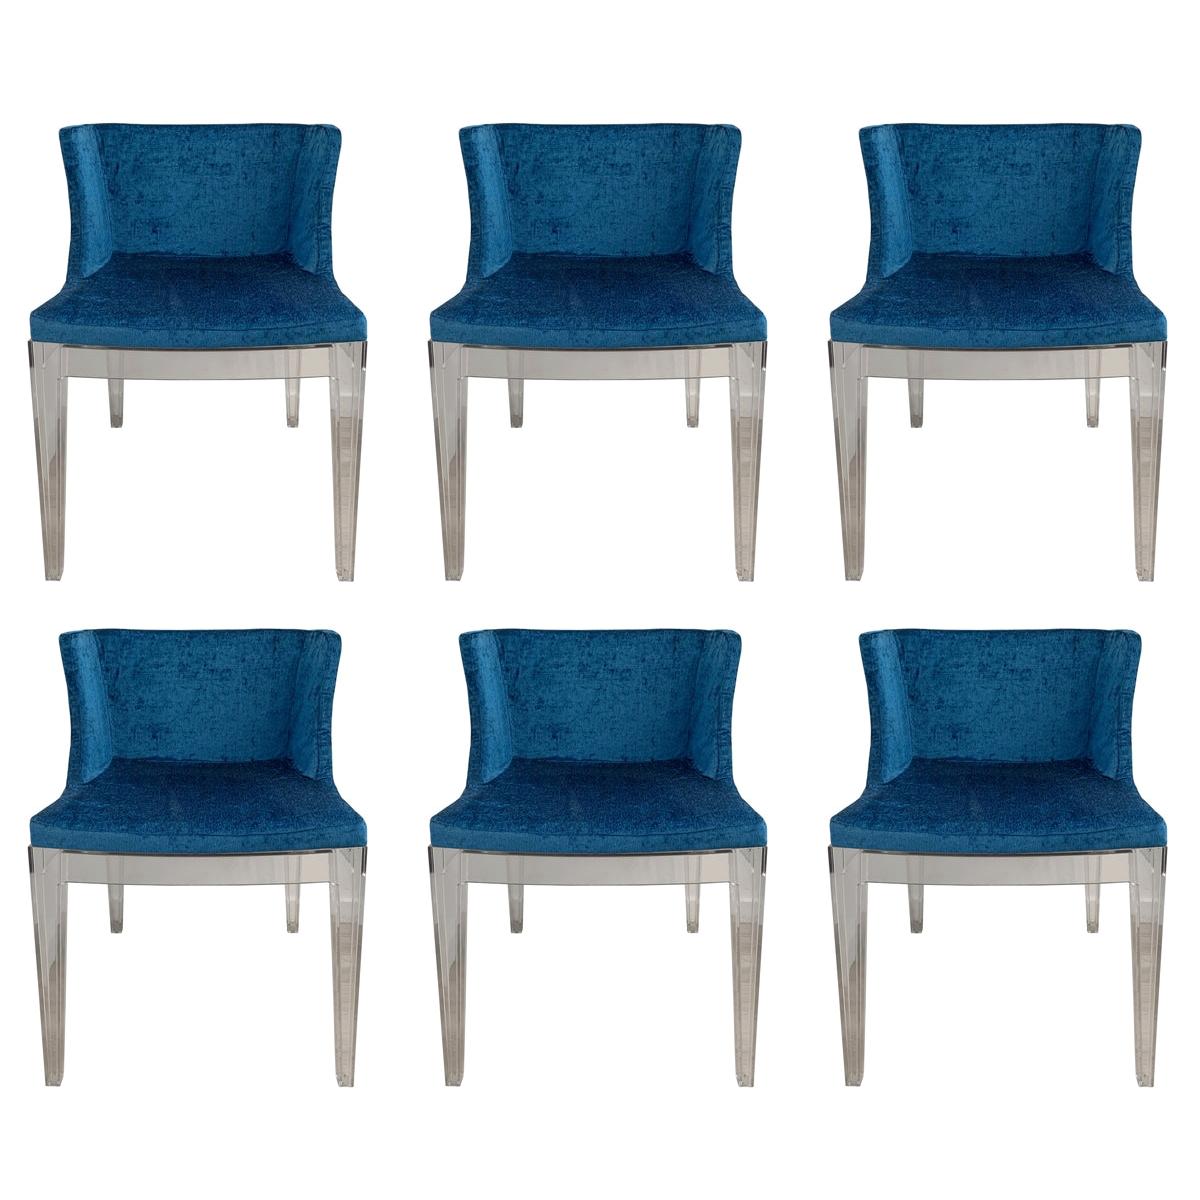 6 Mademoiselle Chairs by Philippe Starck, 4 Kartell in Blue Romo Fabric